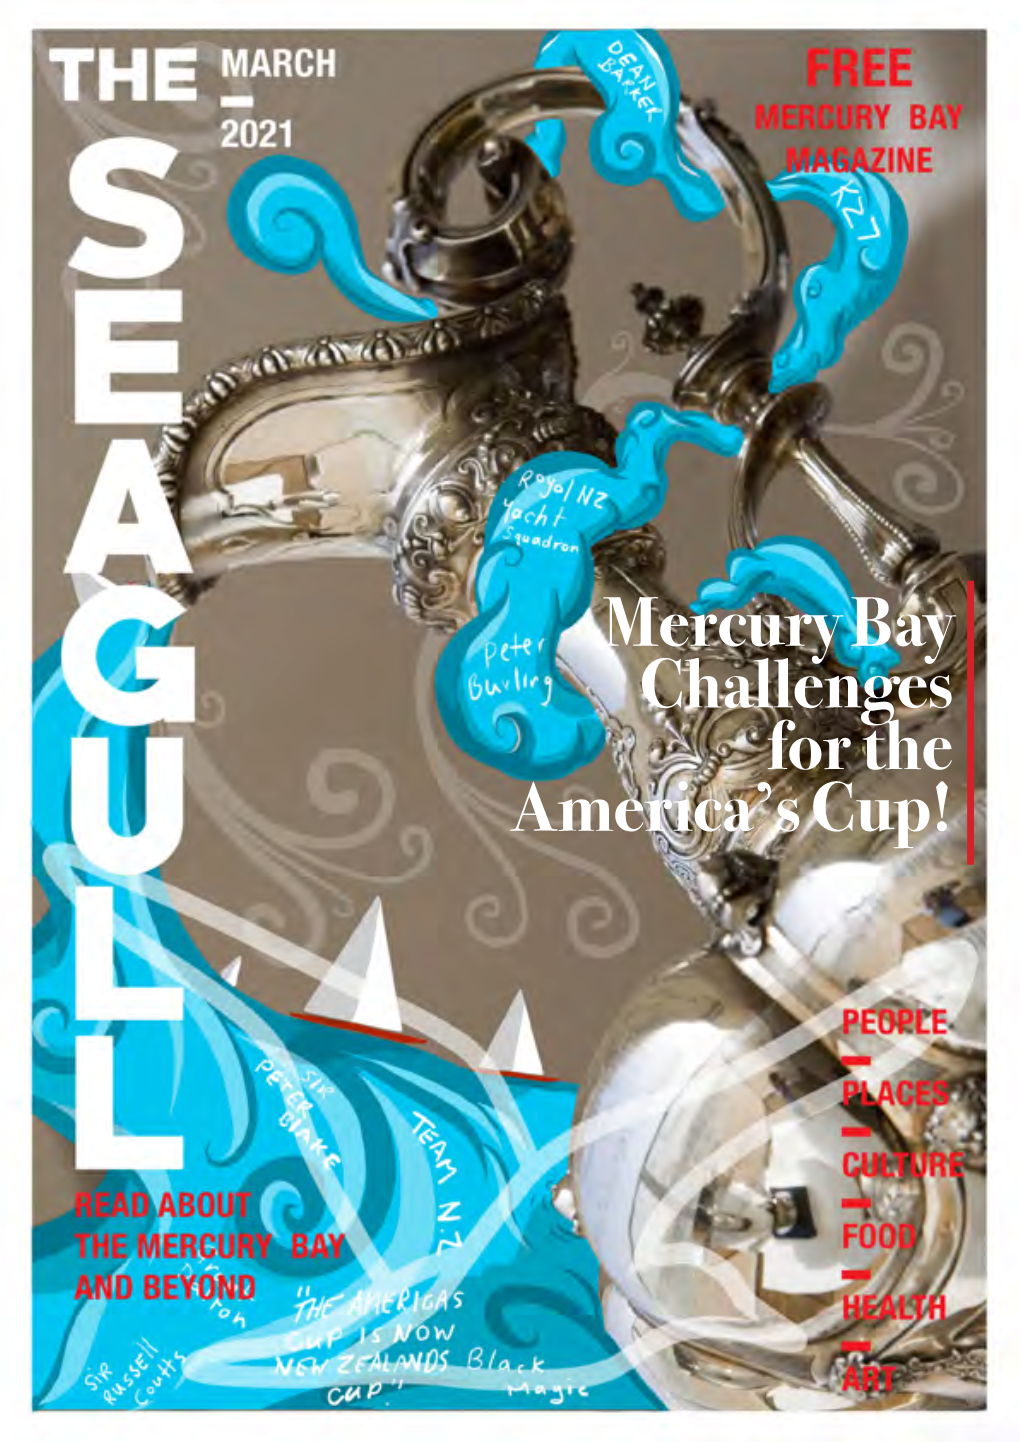 Mercury Bay Challenges for the America's Cup!